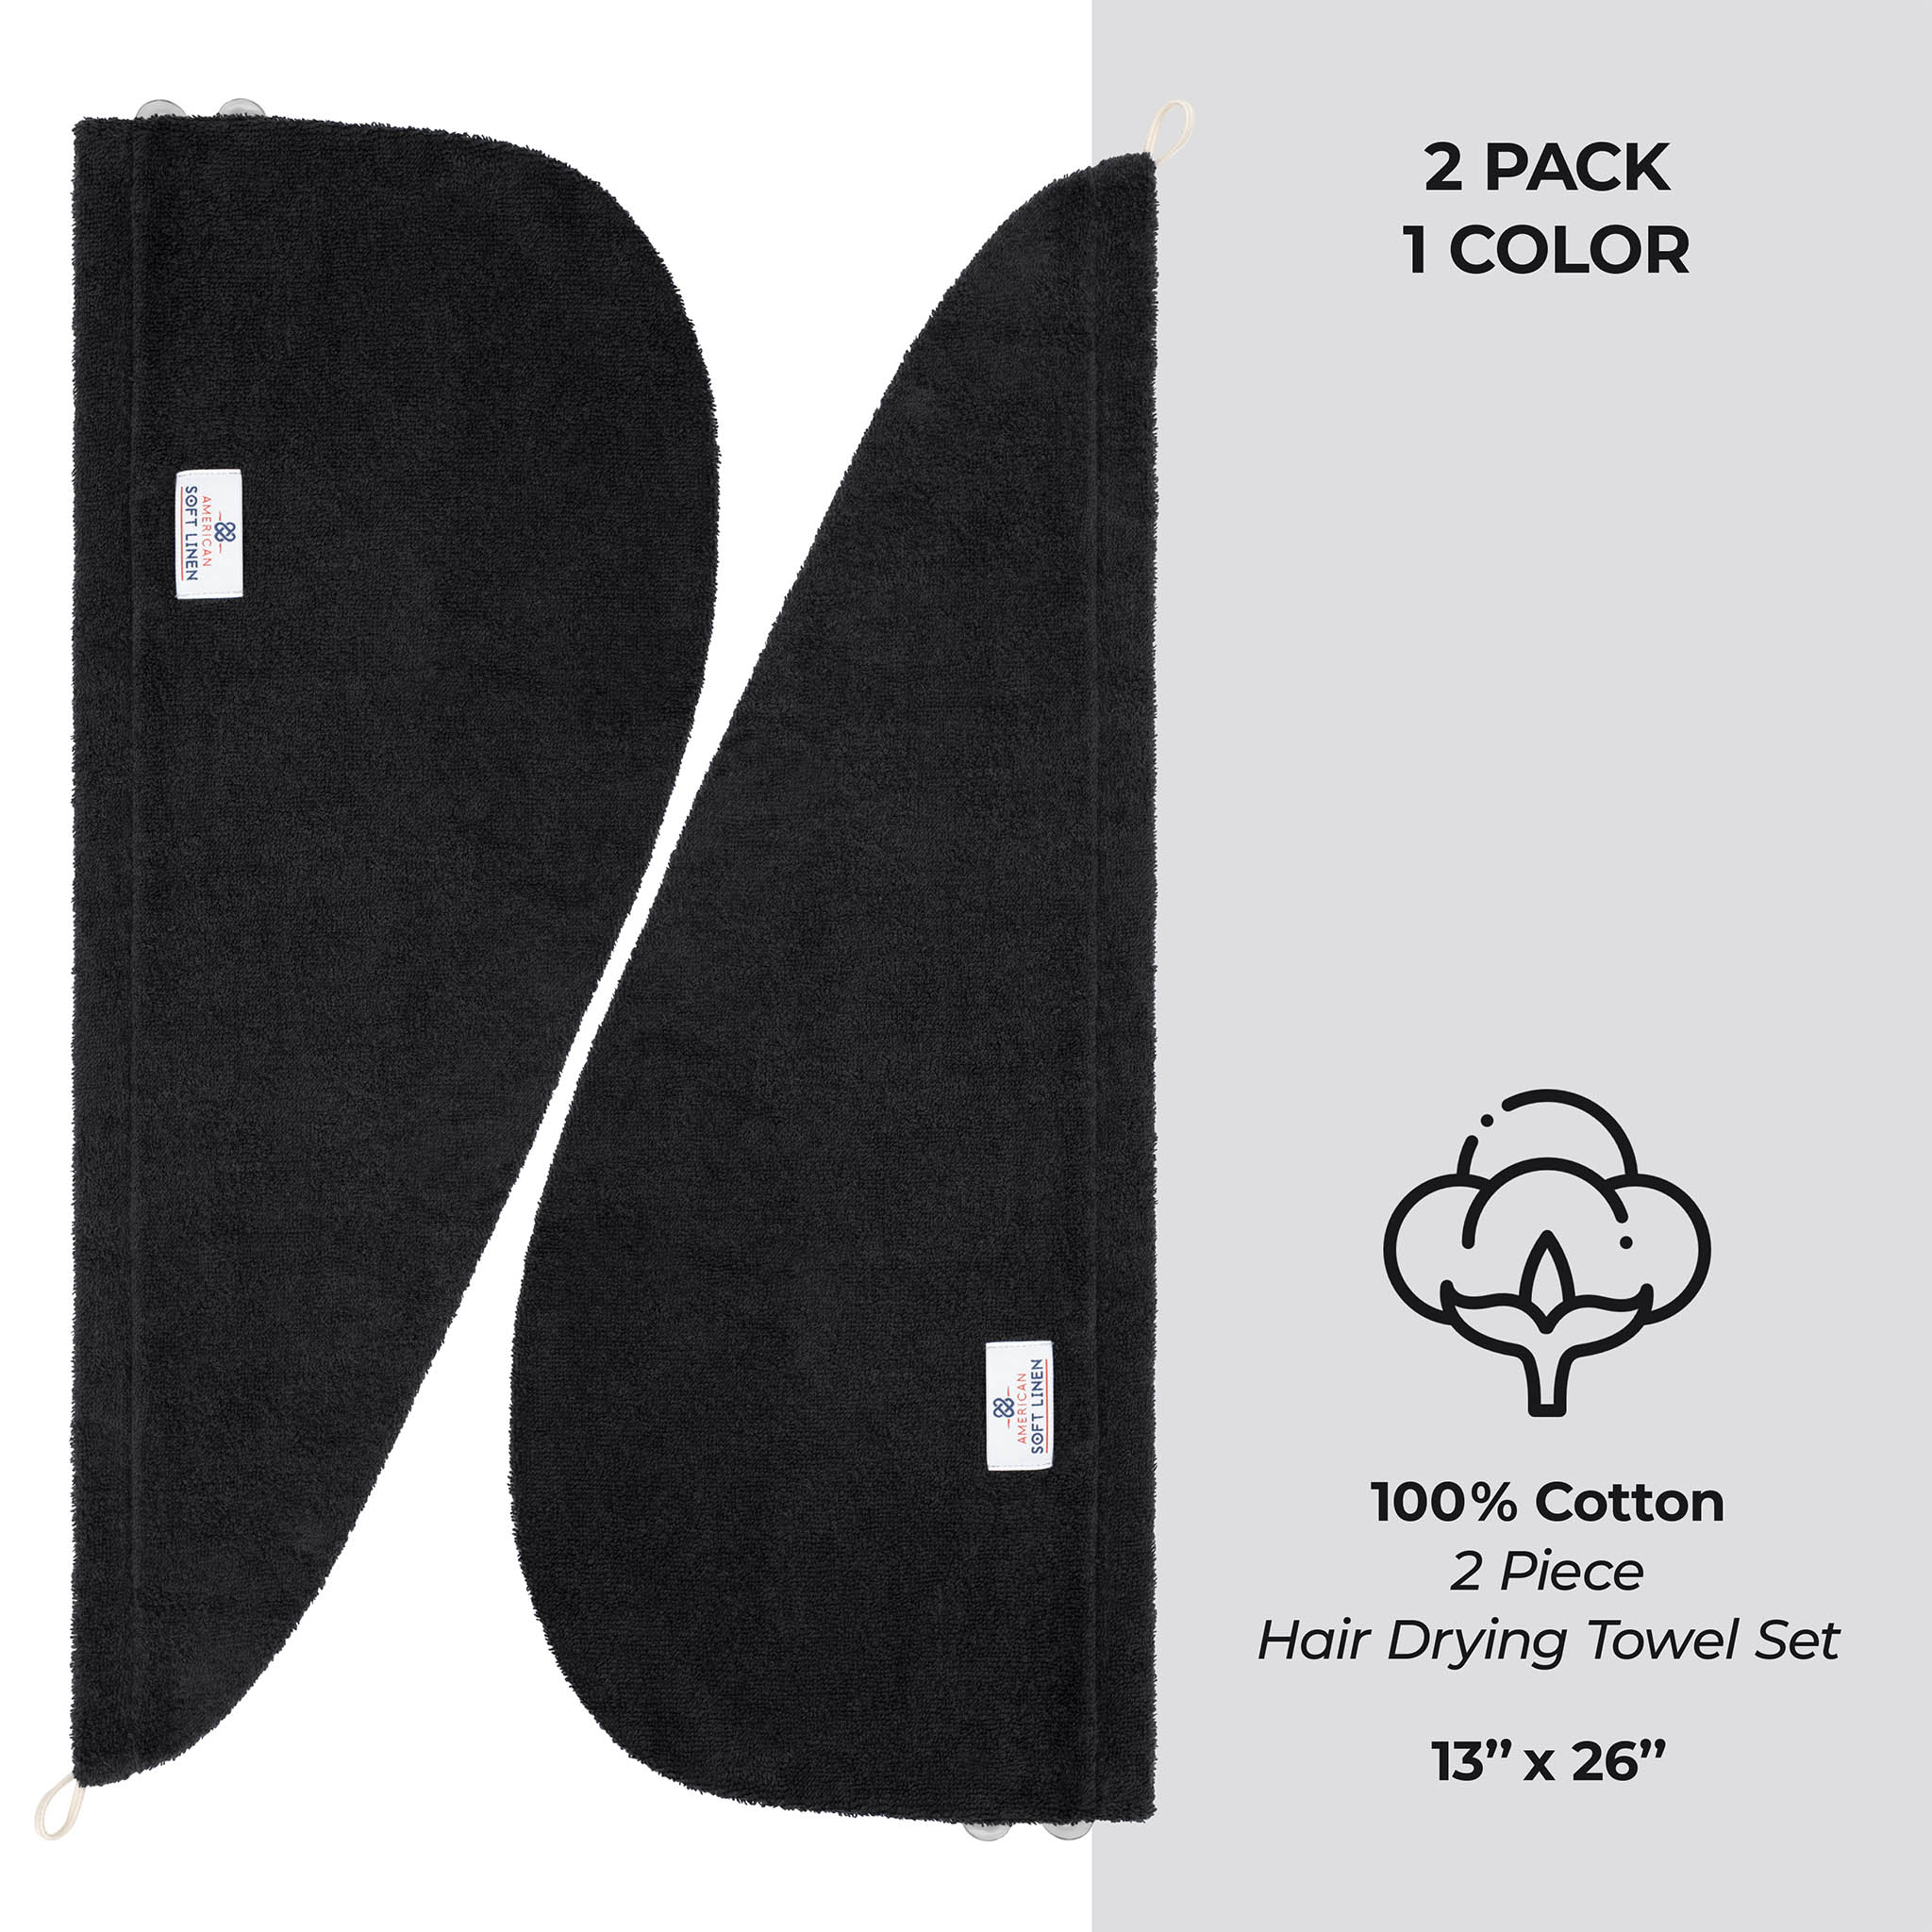 American Soft Linen 100% Cotton Hair Drying Towels for Women 2 pack 75 set case pack black-4